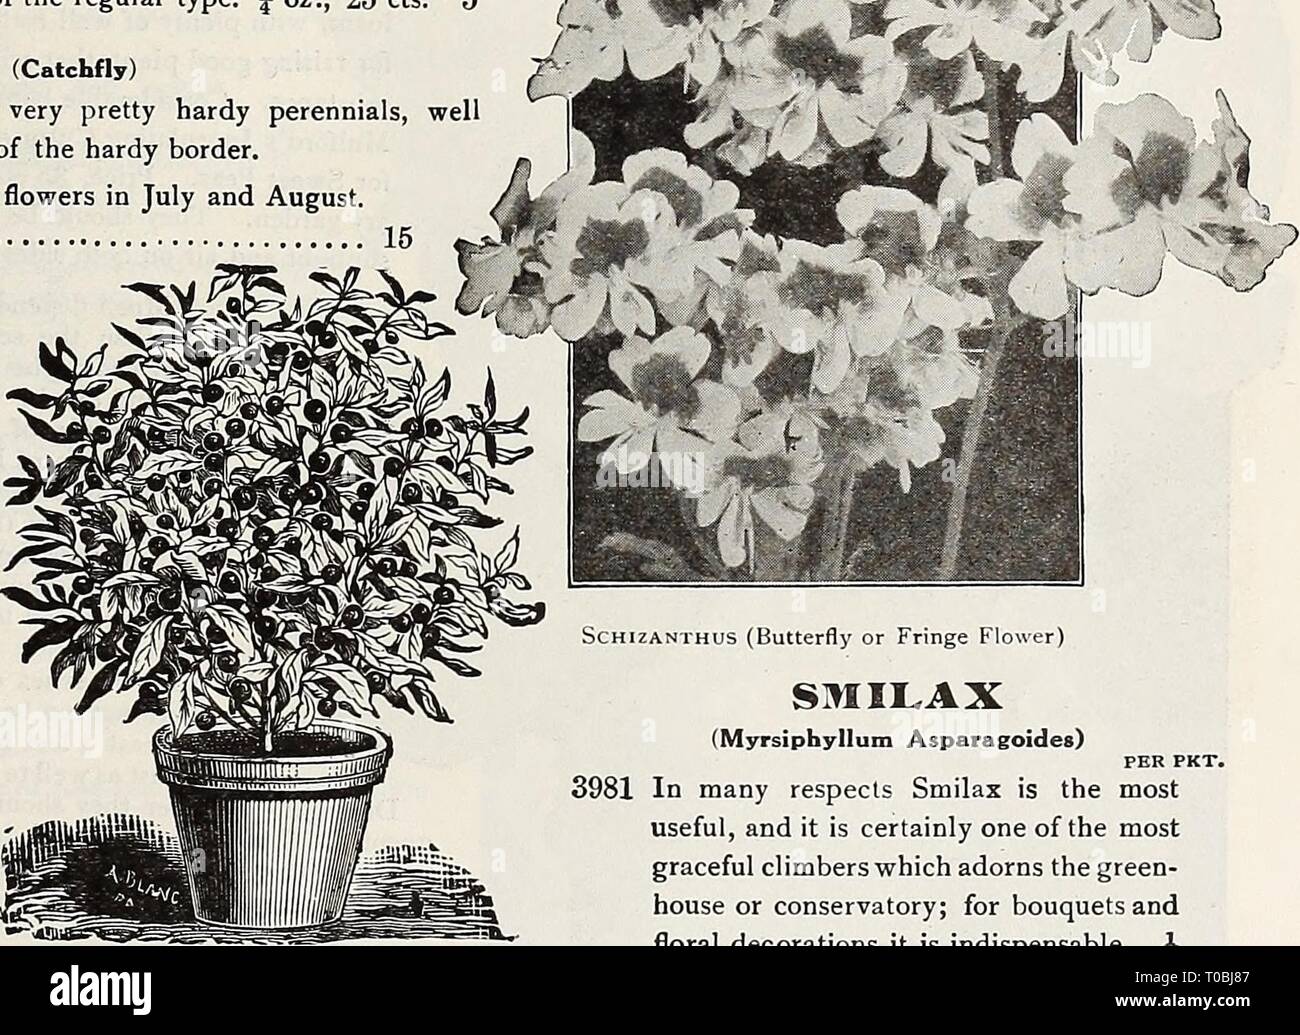 Dreer's garden book 1921 (1921) Dreer's garden book 1921 dreersgardenbook1921henr Year: 1921  m'ji^^*rM    SILENE (Catchfly) The varieties offered below are very pretty hardy perennials, well adapted for the rockery or the front of the hardy border. 3977 Alpestris. Glistening white flowers in July and August. 4 in 3978 Schafta {Autumn Catchfly). A charming border or rock plant, grow- ing from 4 to 6 inches high, with masses of bright pink flowers from July to October 15 Straw^ Flo livers or Everlastings This name is frequently applied to all sorts of Everlasting flowers, but is usually conside Stock Photo